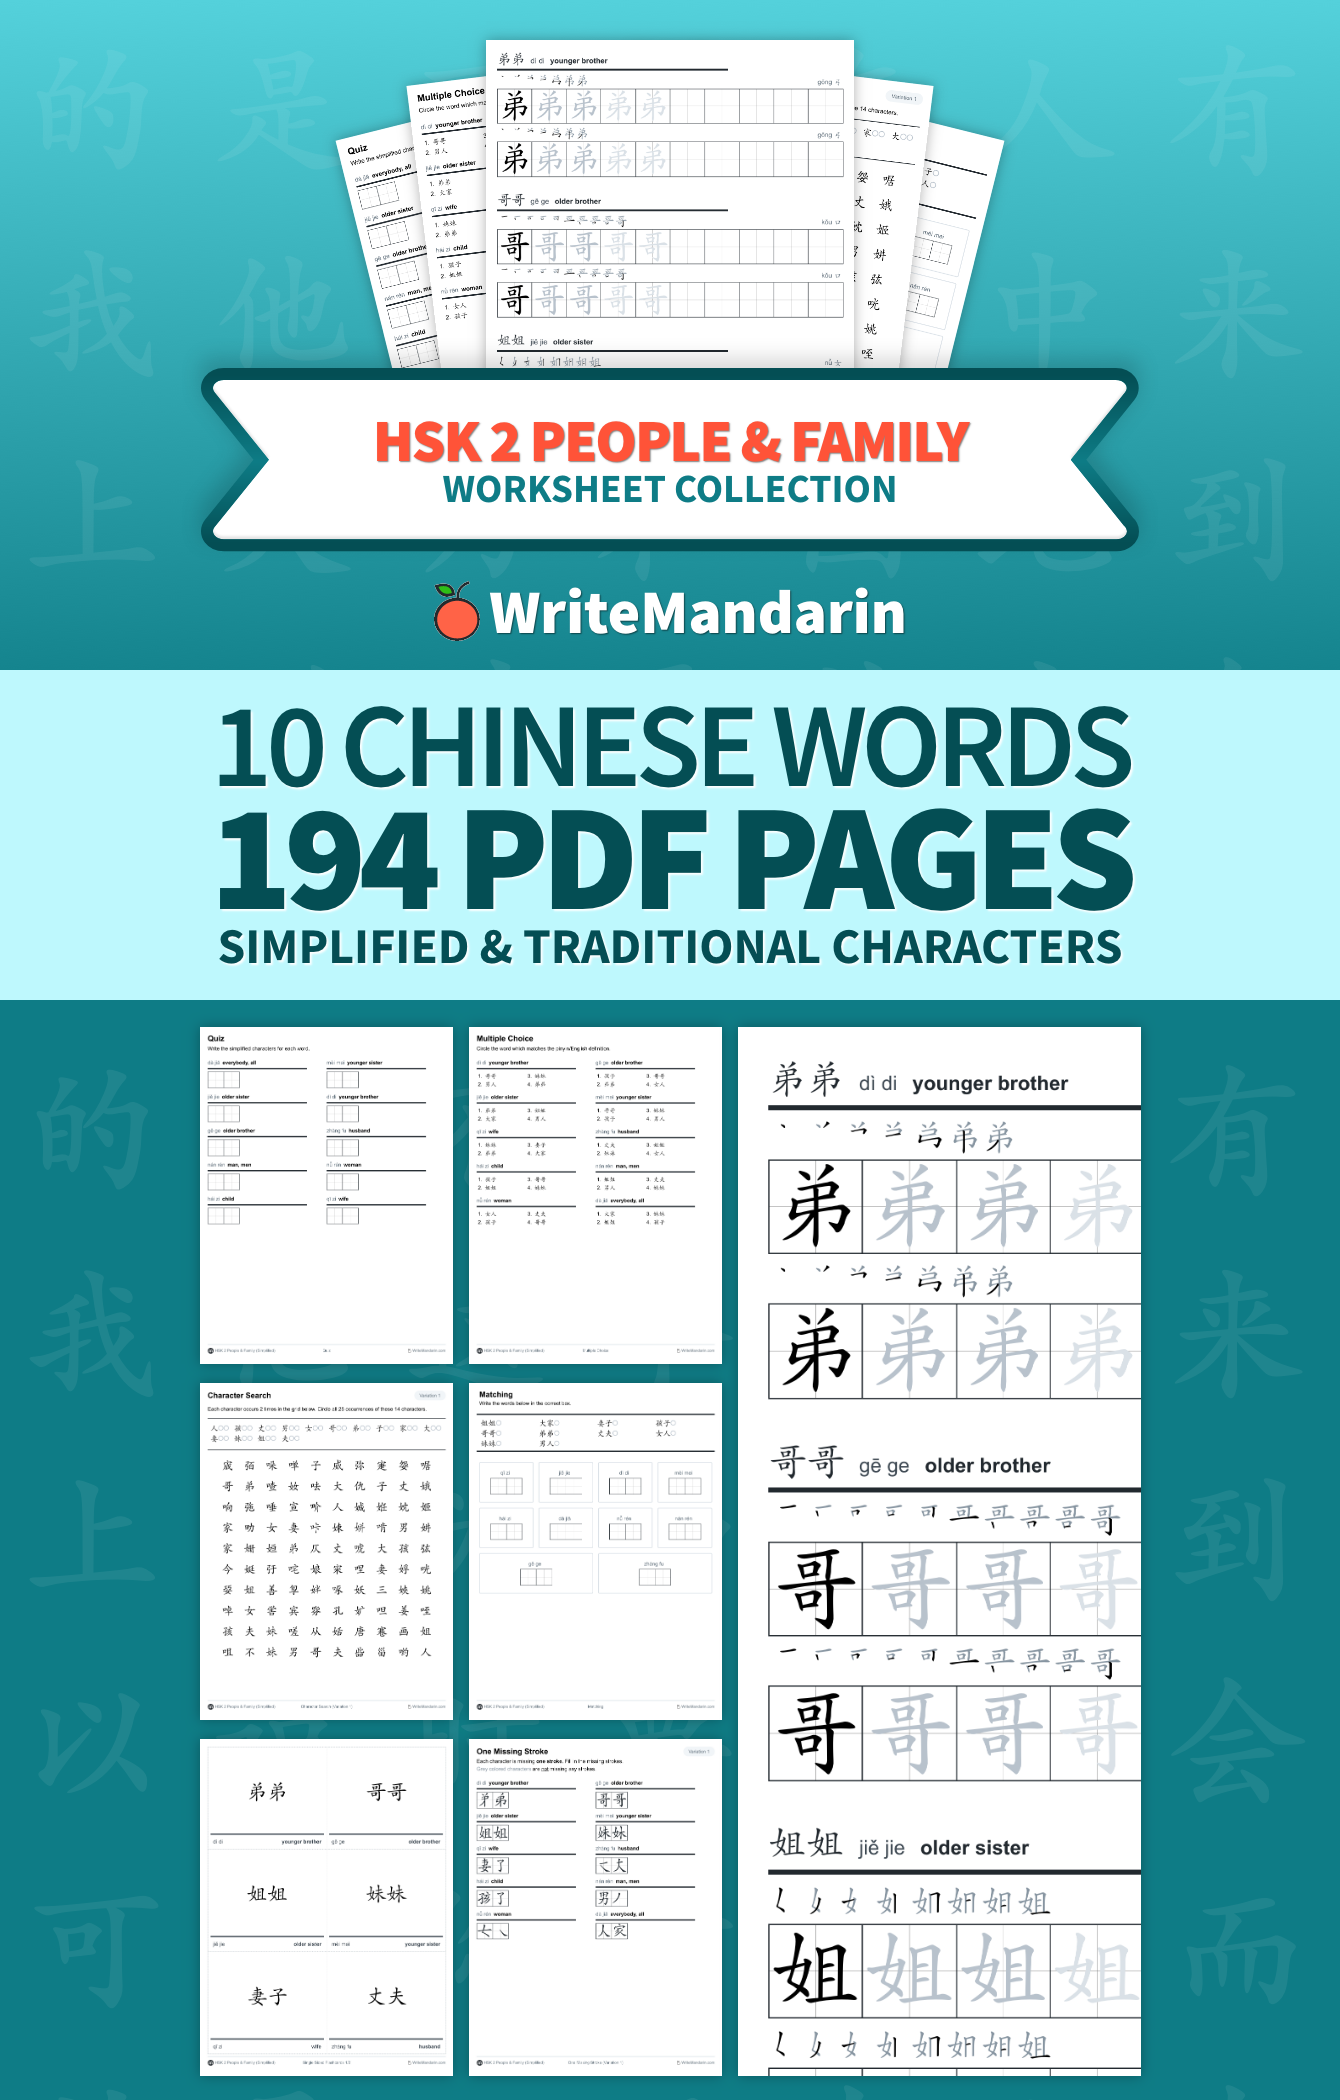 Preview image of HSK 2 People & Family worksheet collection